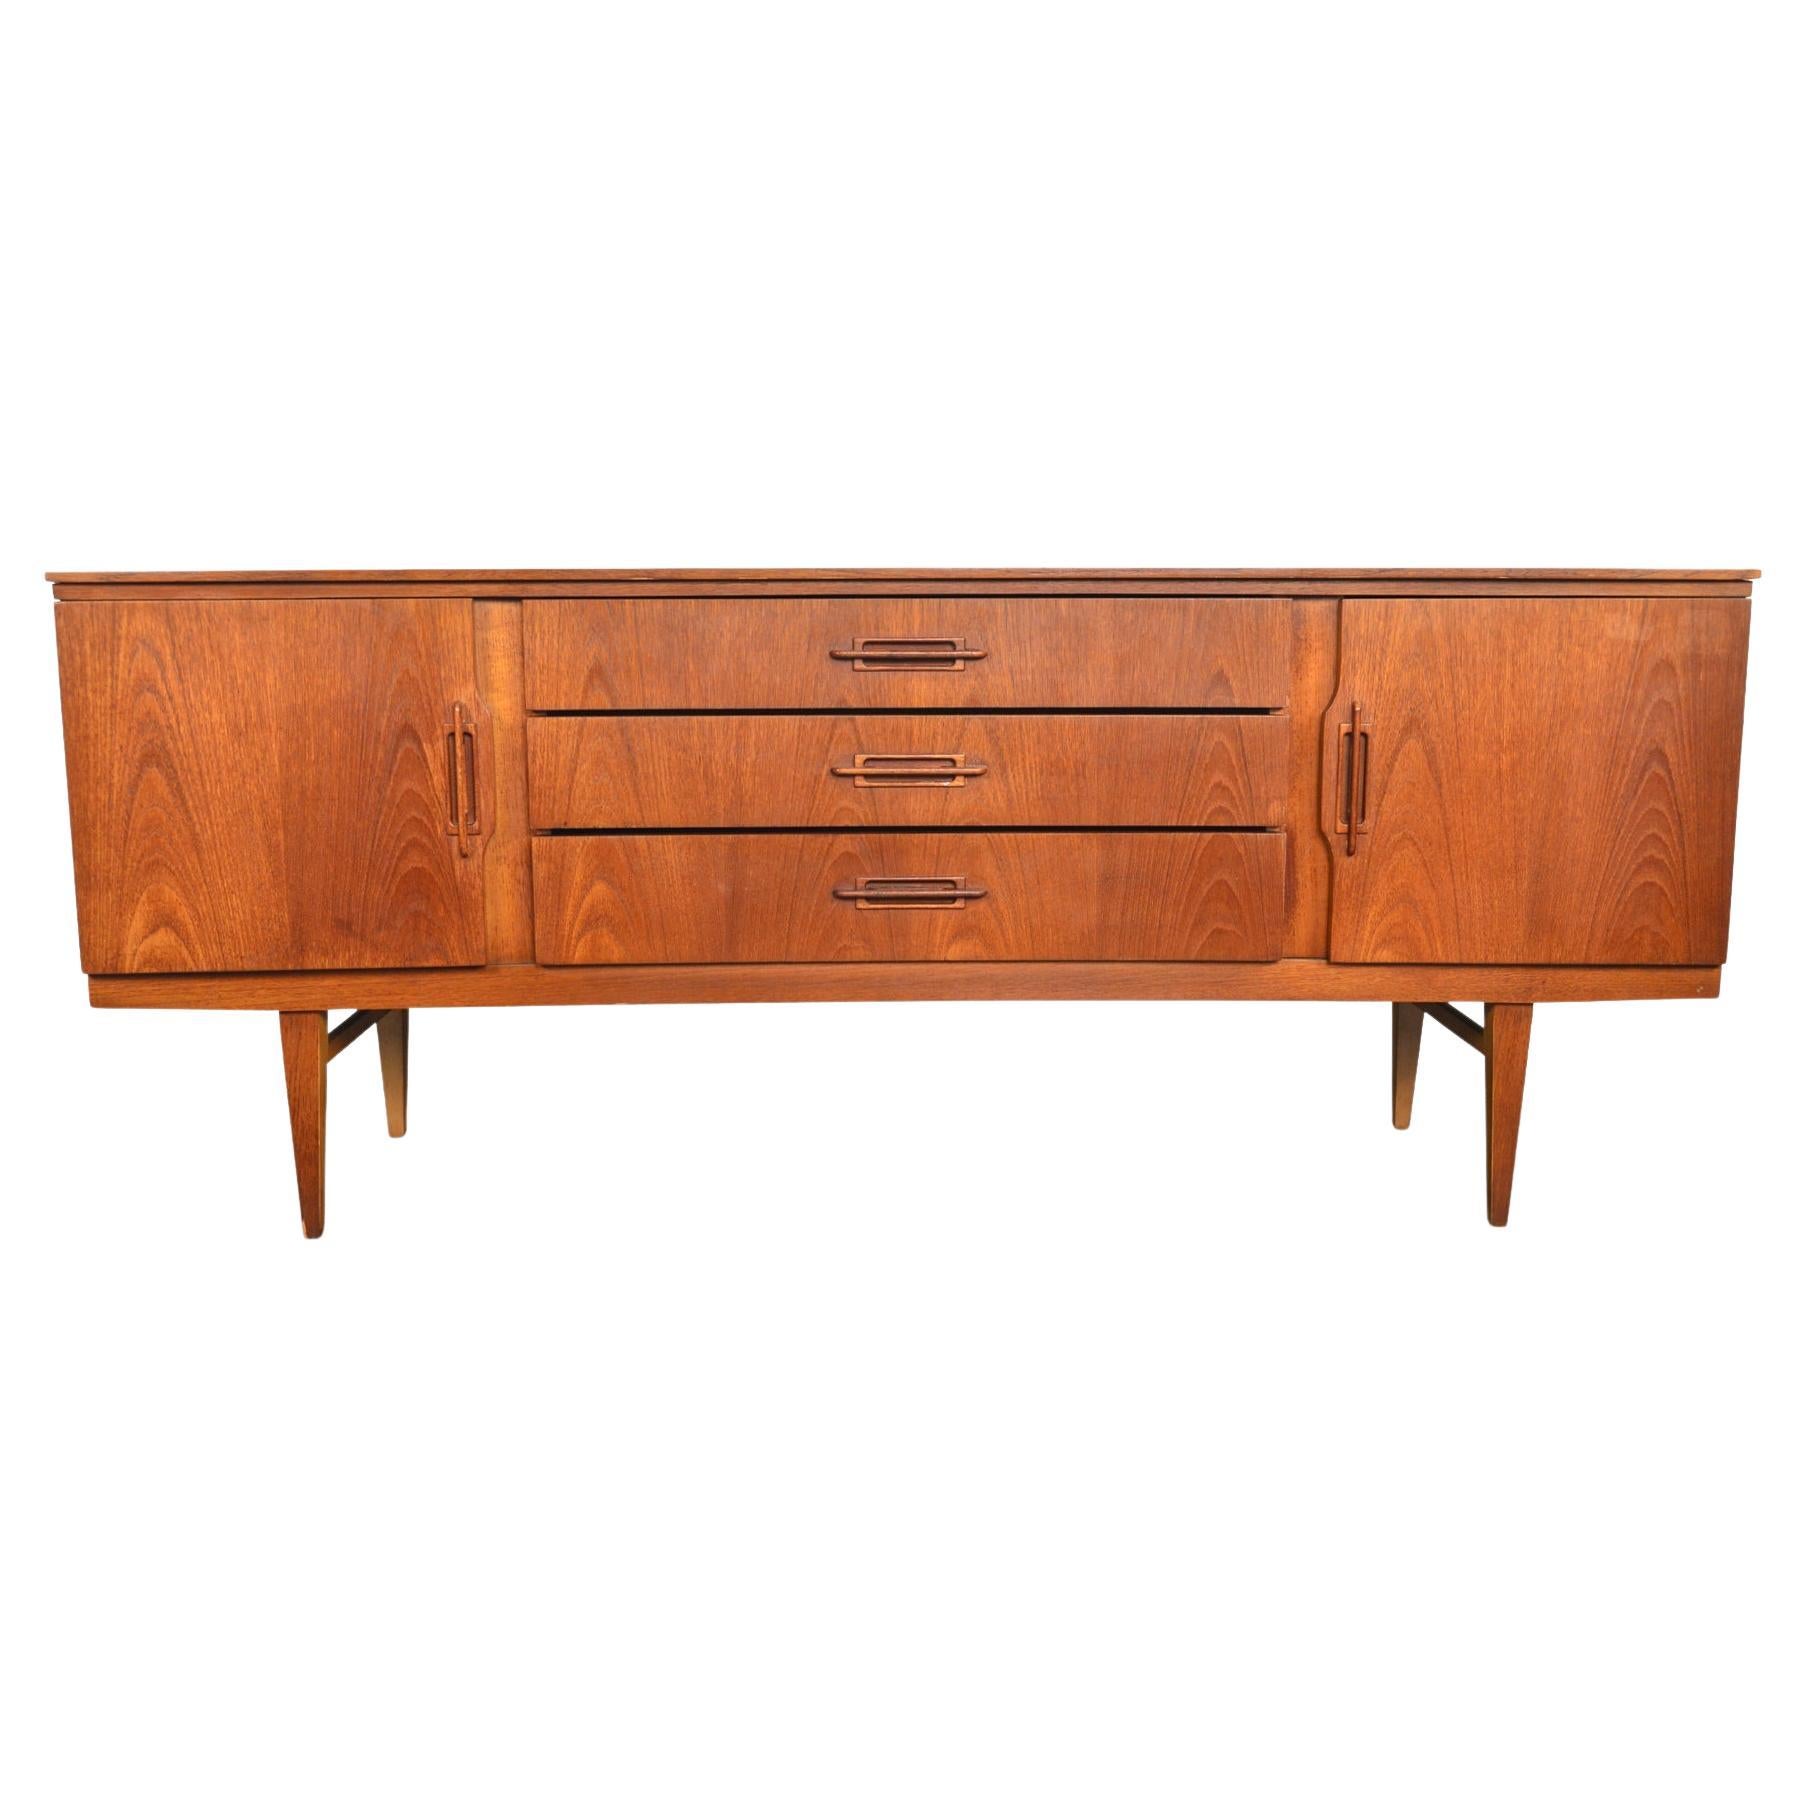 Mid-Century Teak Credenza by Beautility #2